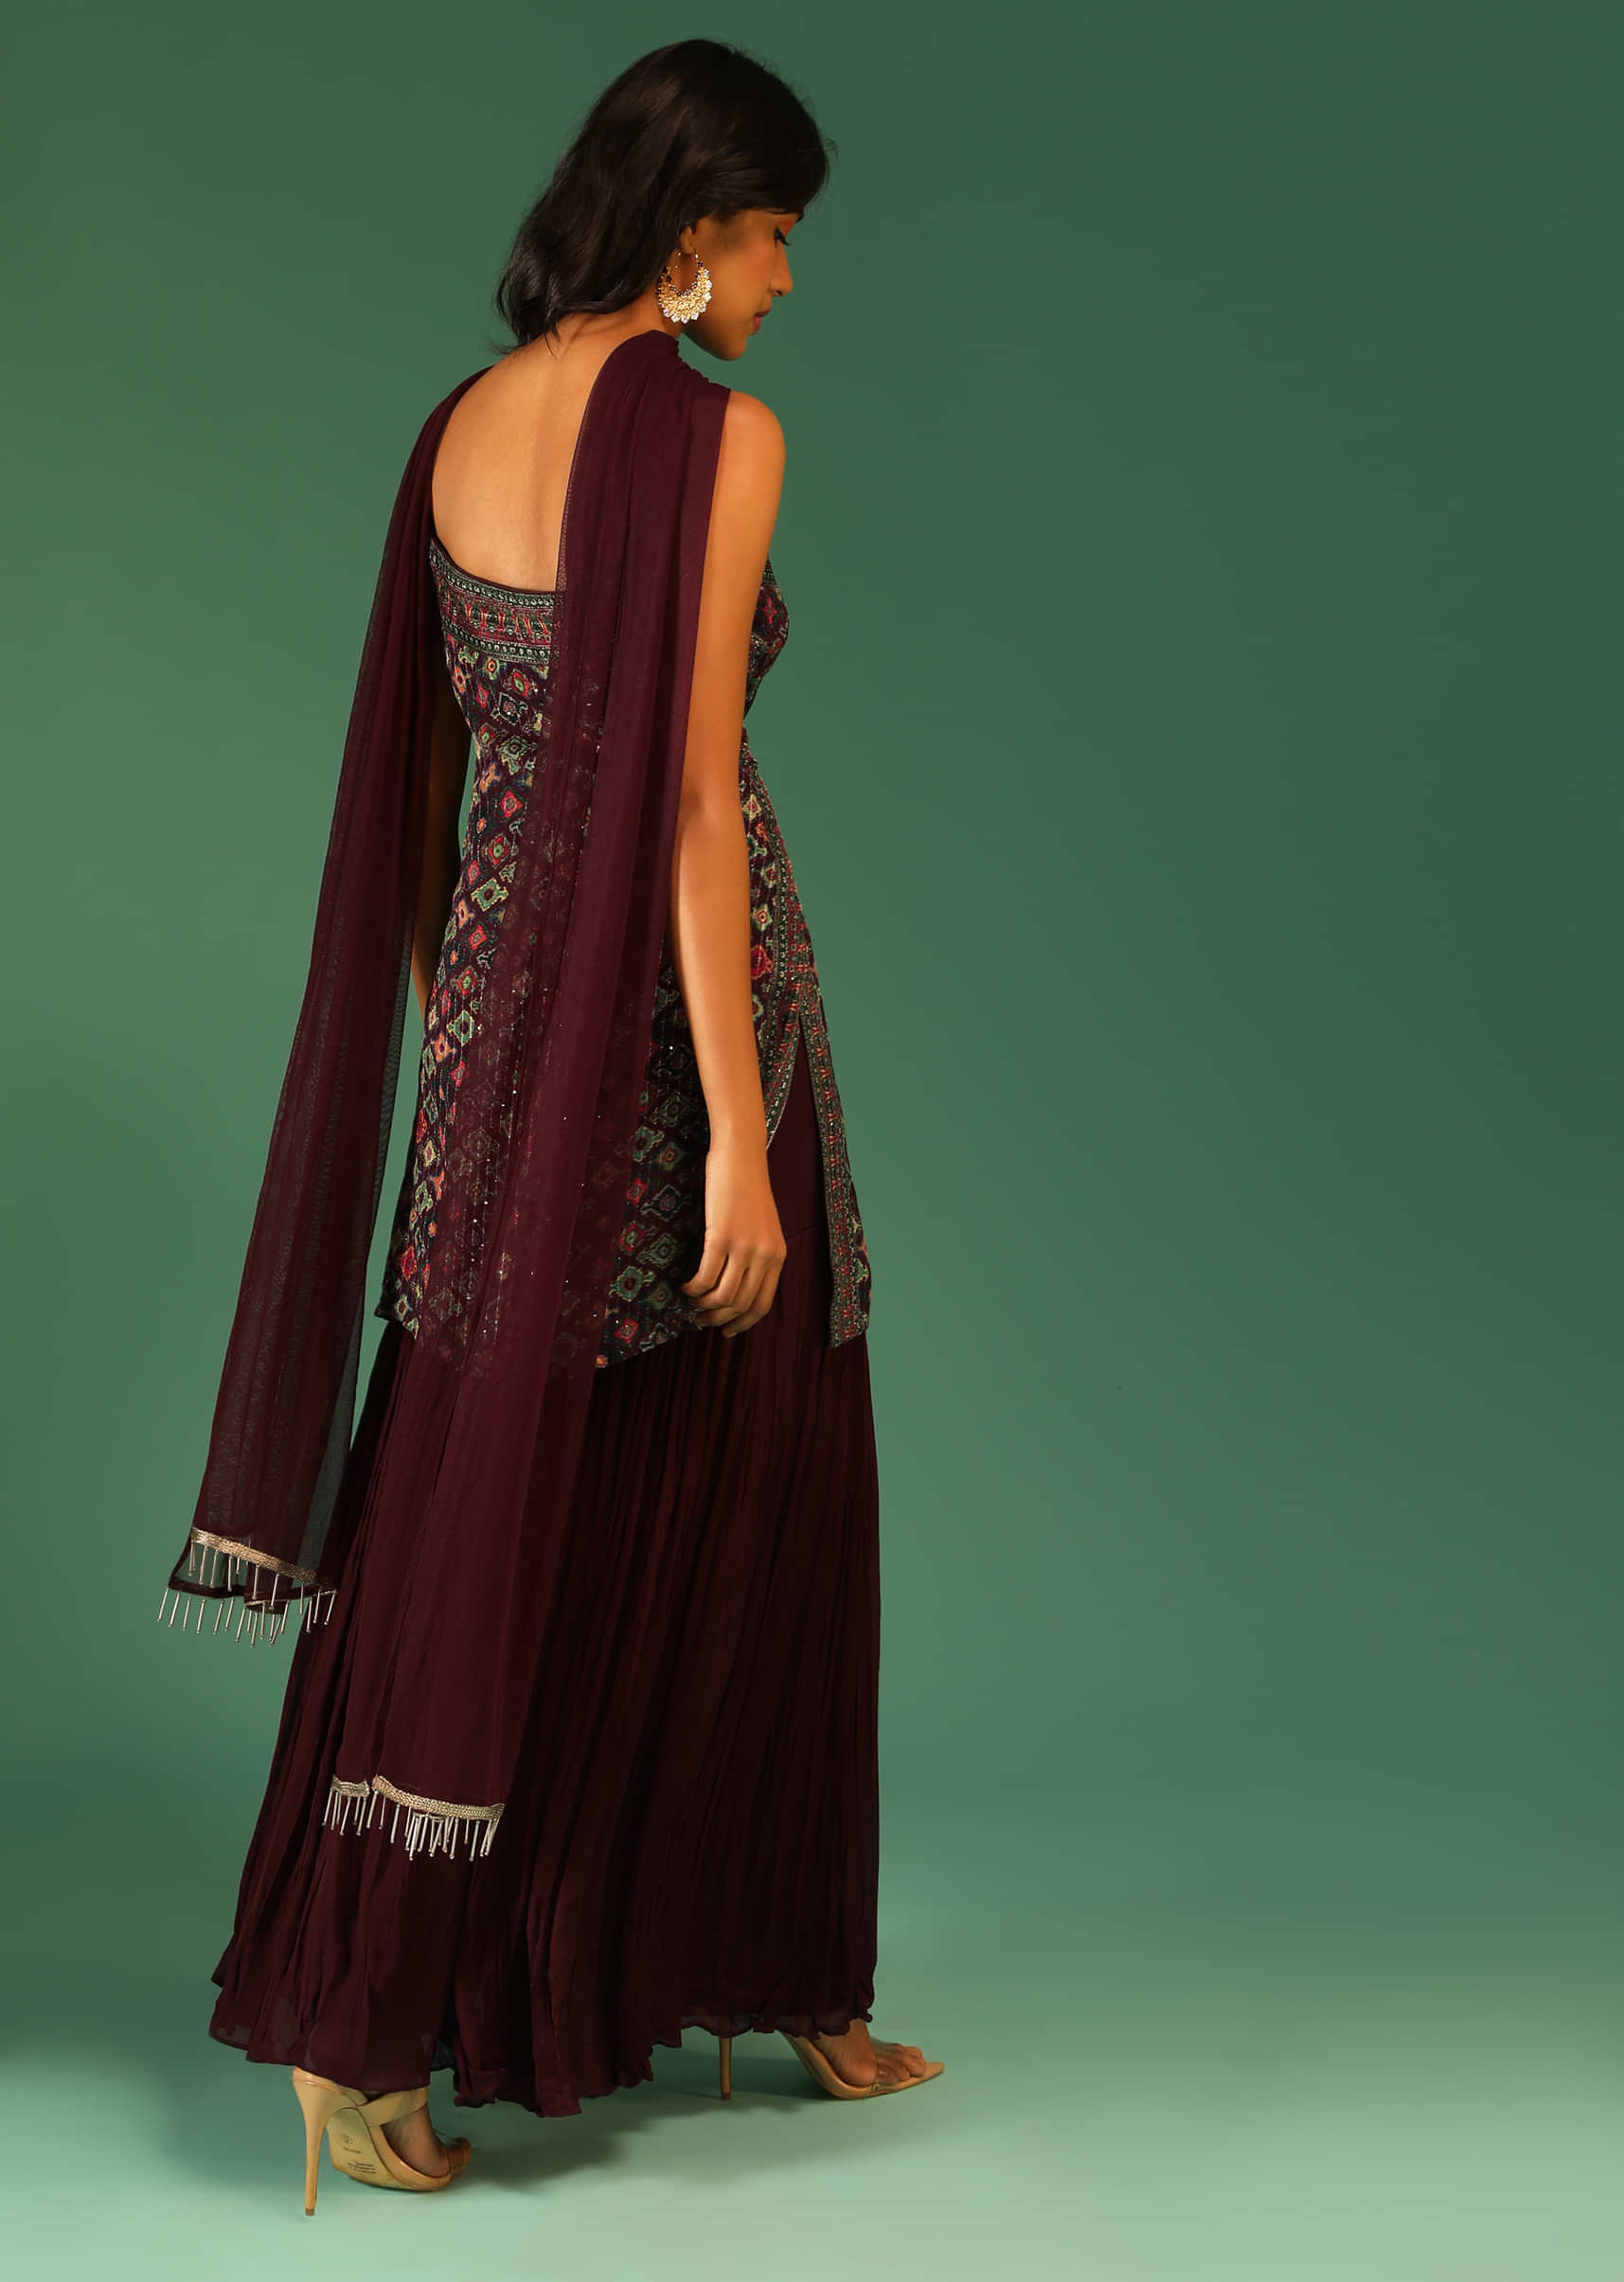 Plum Purple Sharara Suit In Chiffon With Patola Print All Over And Spaghetti Straps  